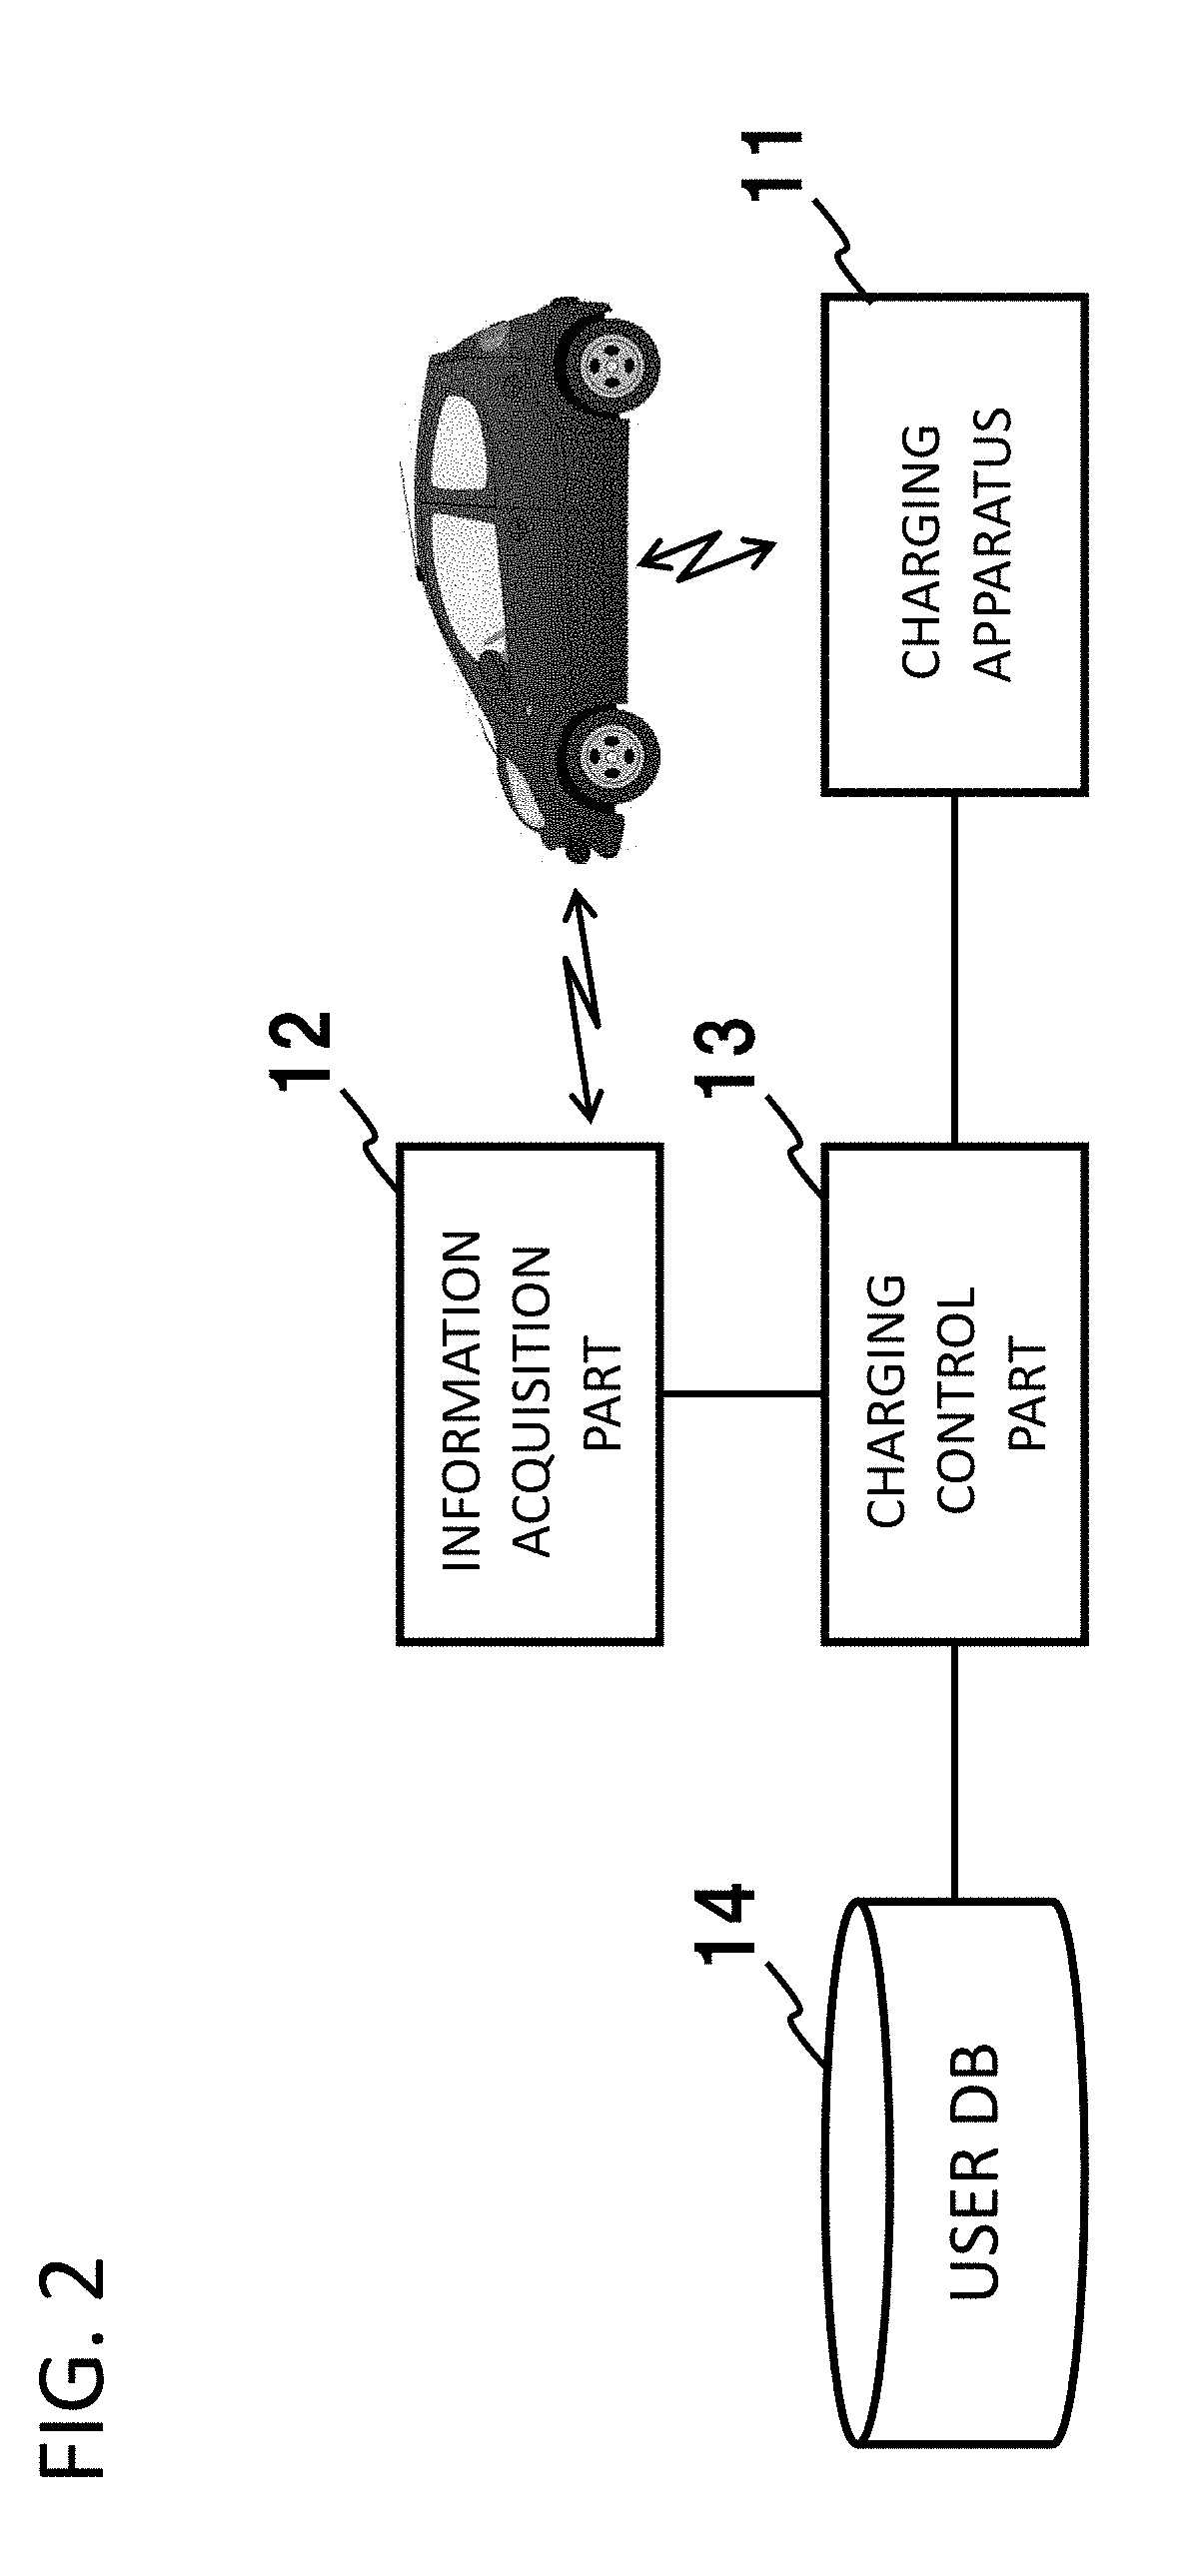 Vehicle charging system, parking lot system, and vehicle charging method